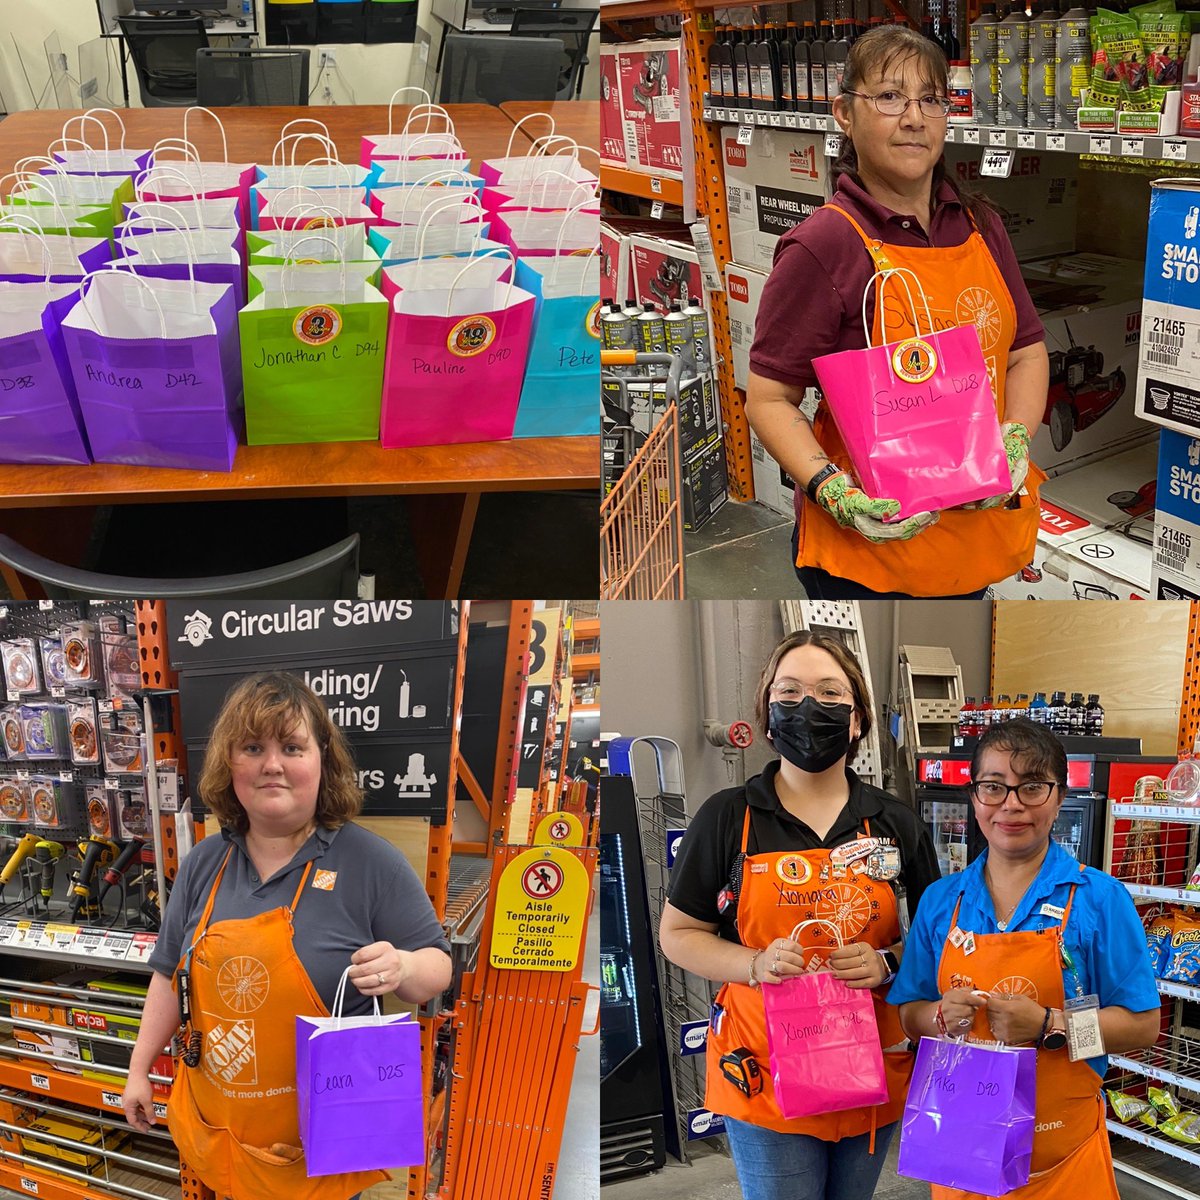 #thd6564 VOA committee taking the time today to celebrate associate Birthdays 🥳 & Anniversaries 🎉 for the month of May!! @elizondo_iii @angelso67742352 @Jennifer_HD6564 @JeffSmi82868051 @lisa_garcia6564  @HRMThomasTHD